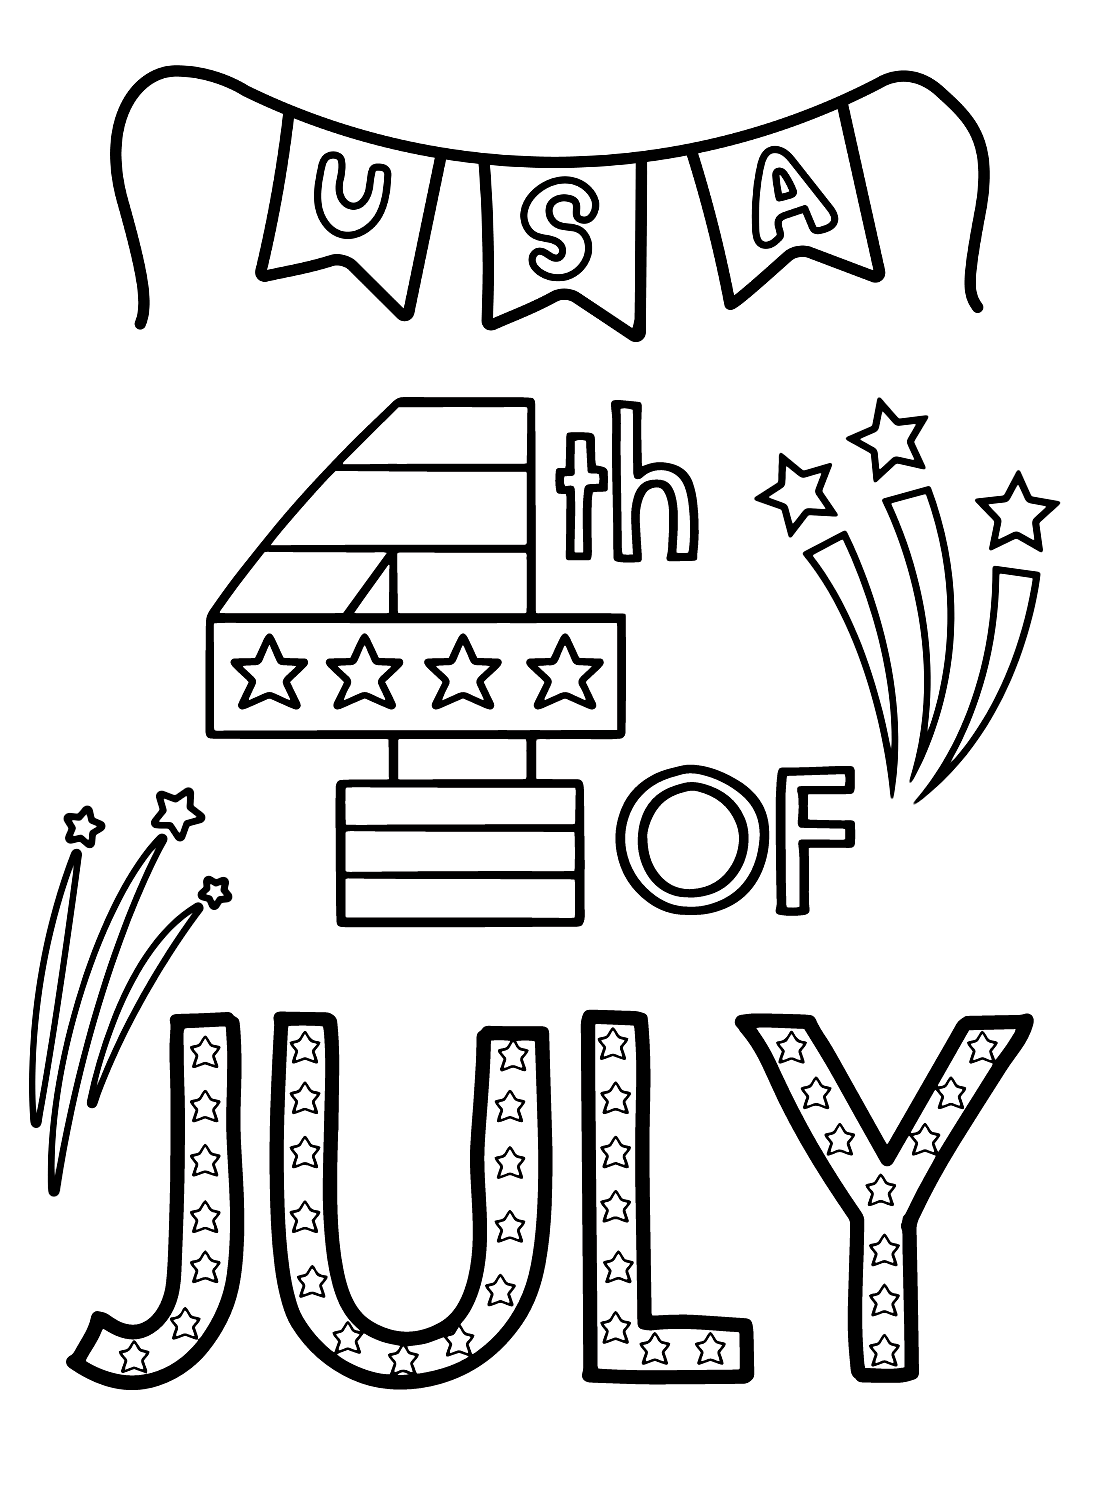 USA 4th of July Coloring Pages